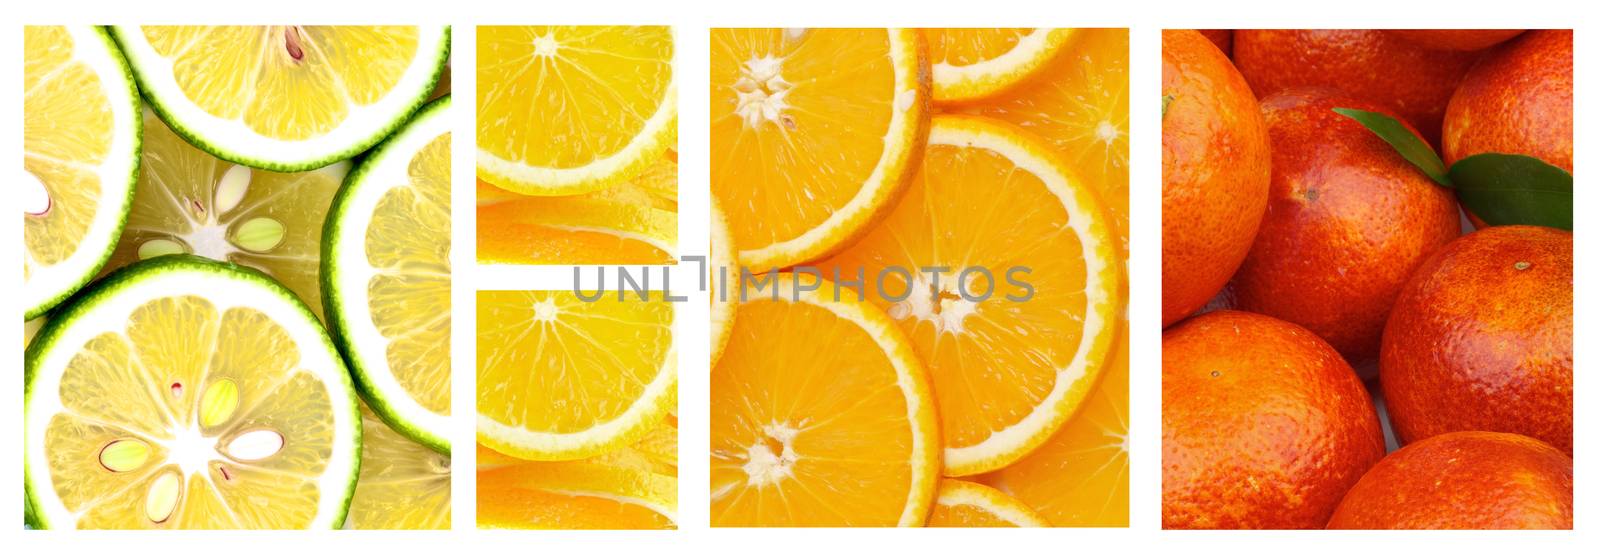 Citrus Collection by zhekos